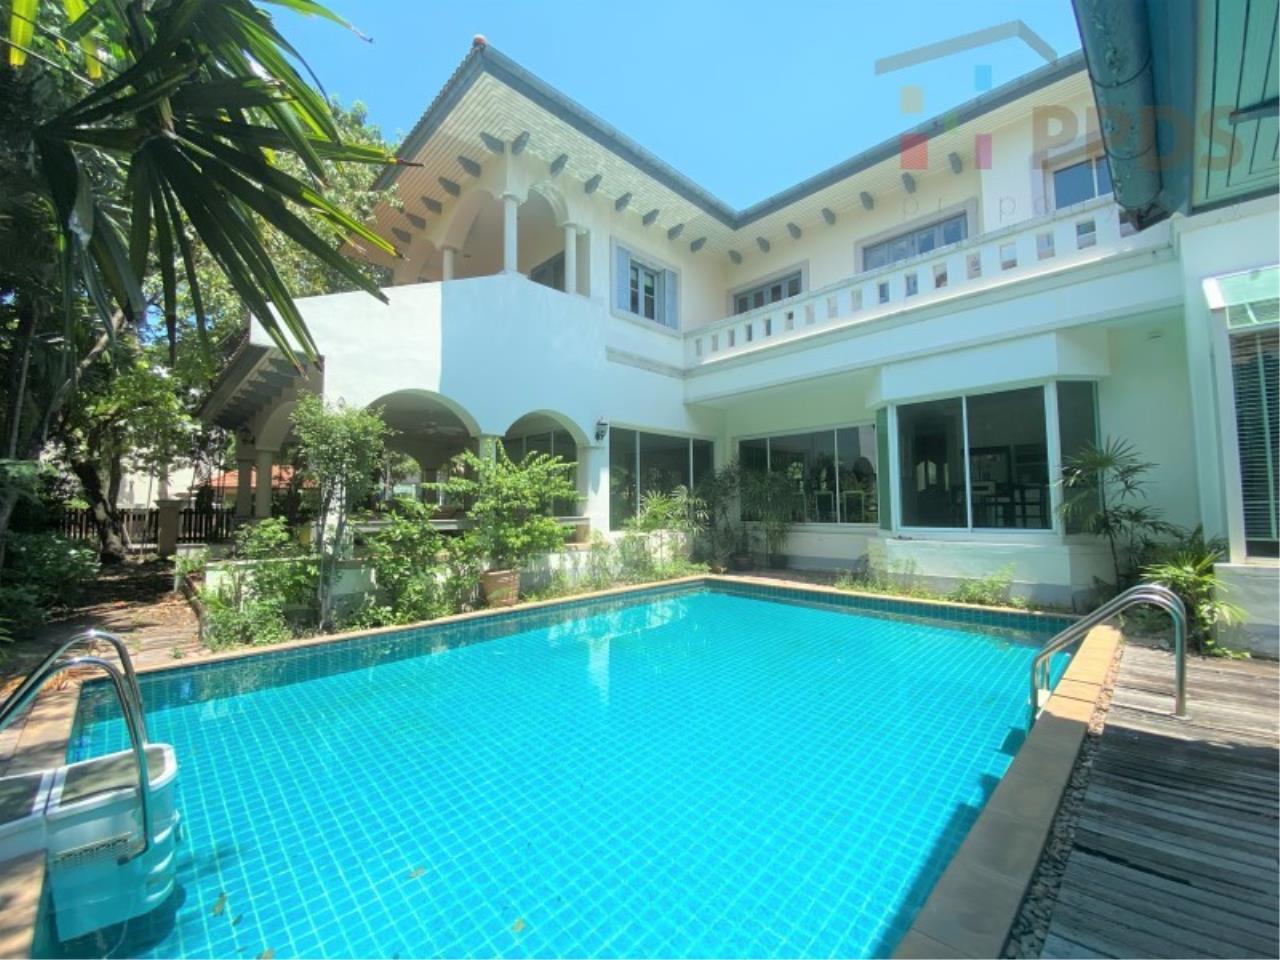 Specious House for sale with private pool at Prukpirom Regent Sukhumvit